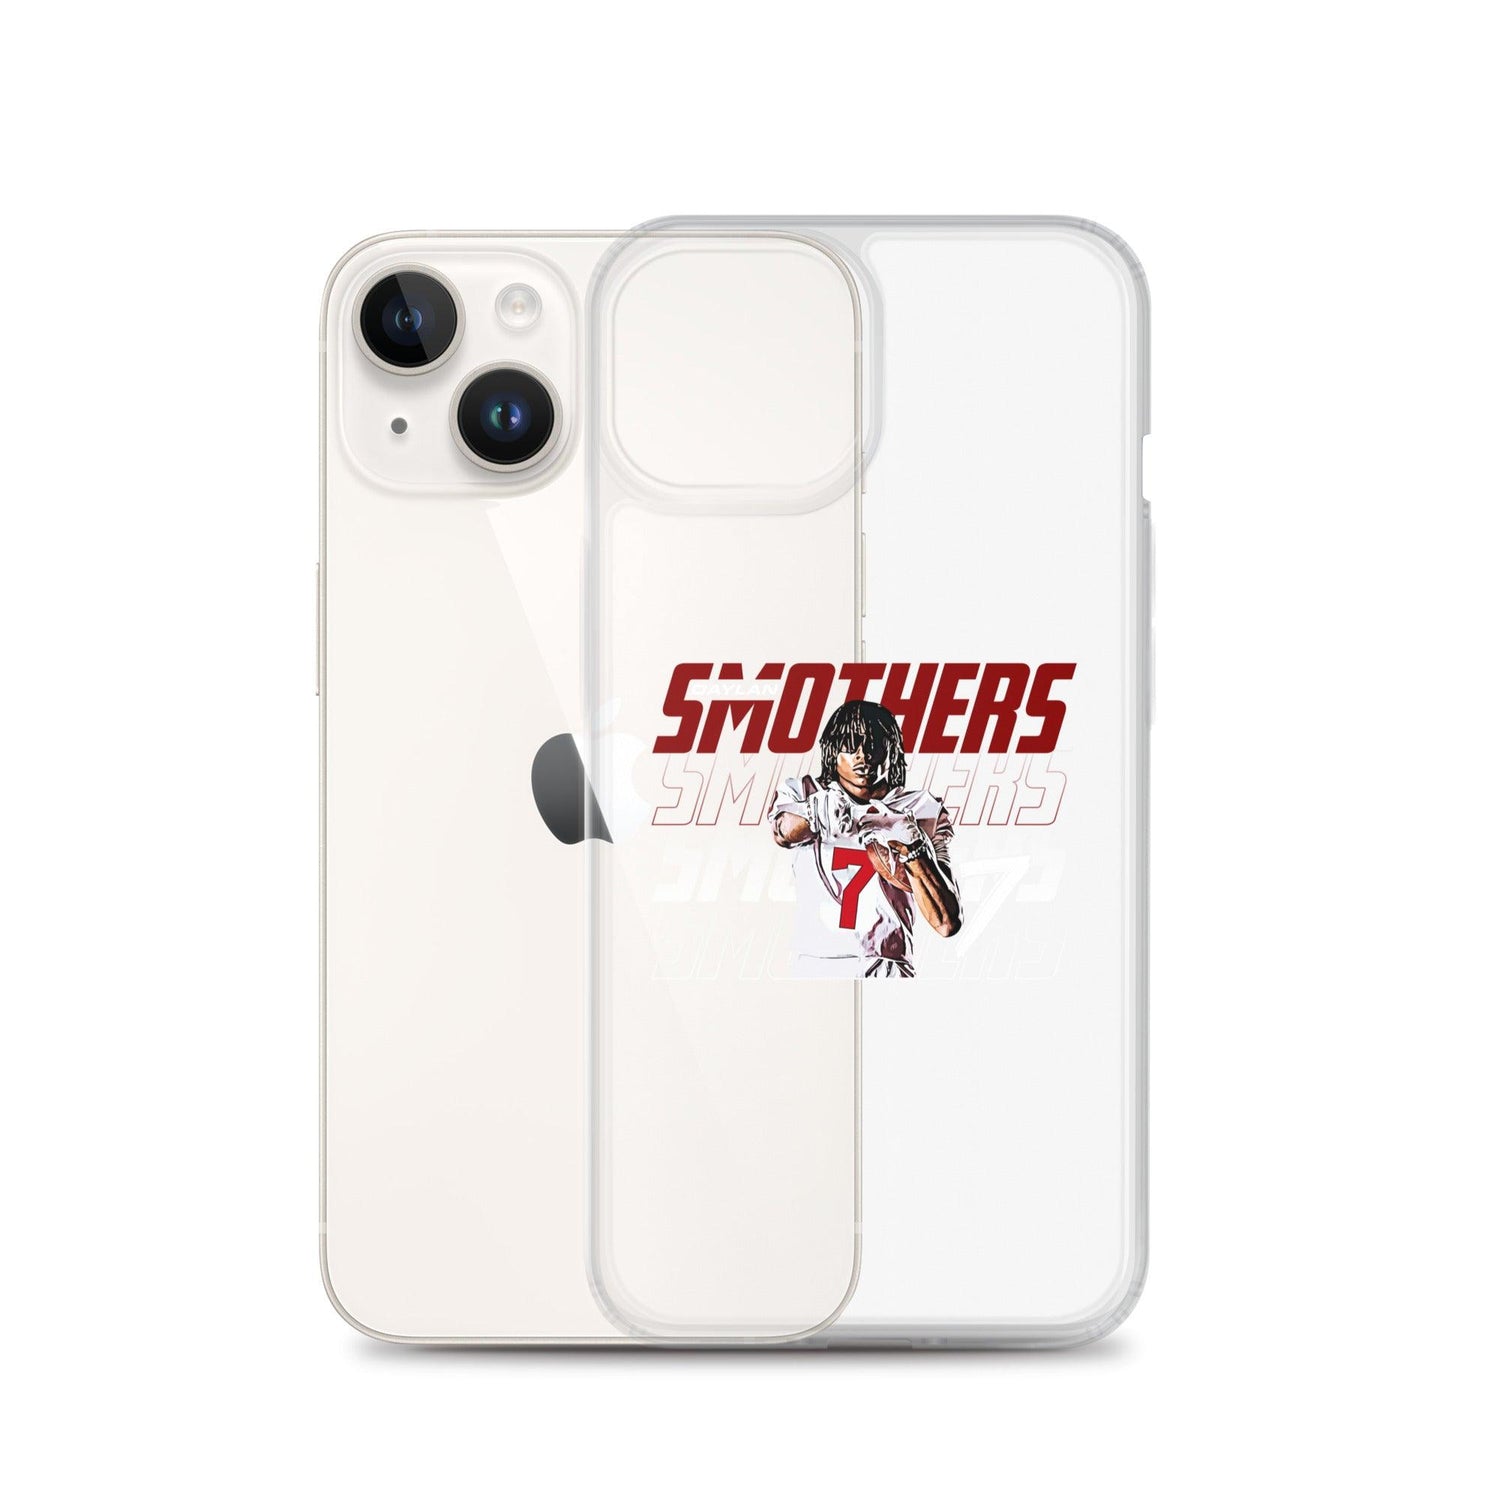 Daylan Smothers "Gameday" iPhone® - Fan Arch